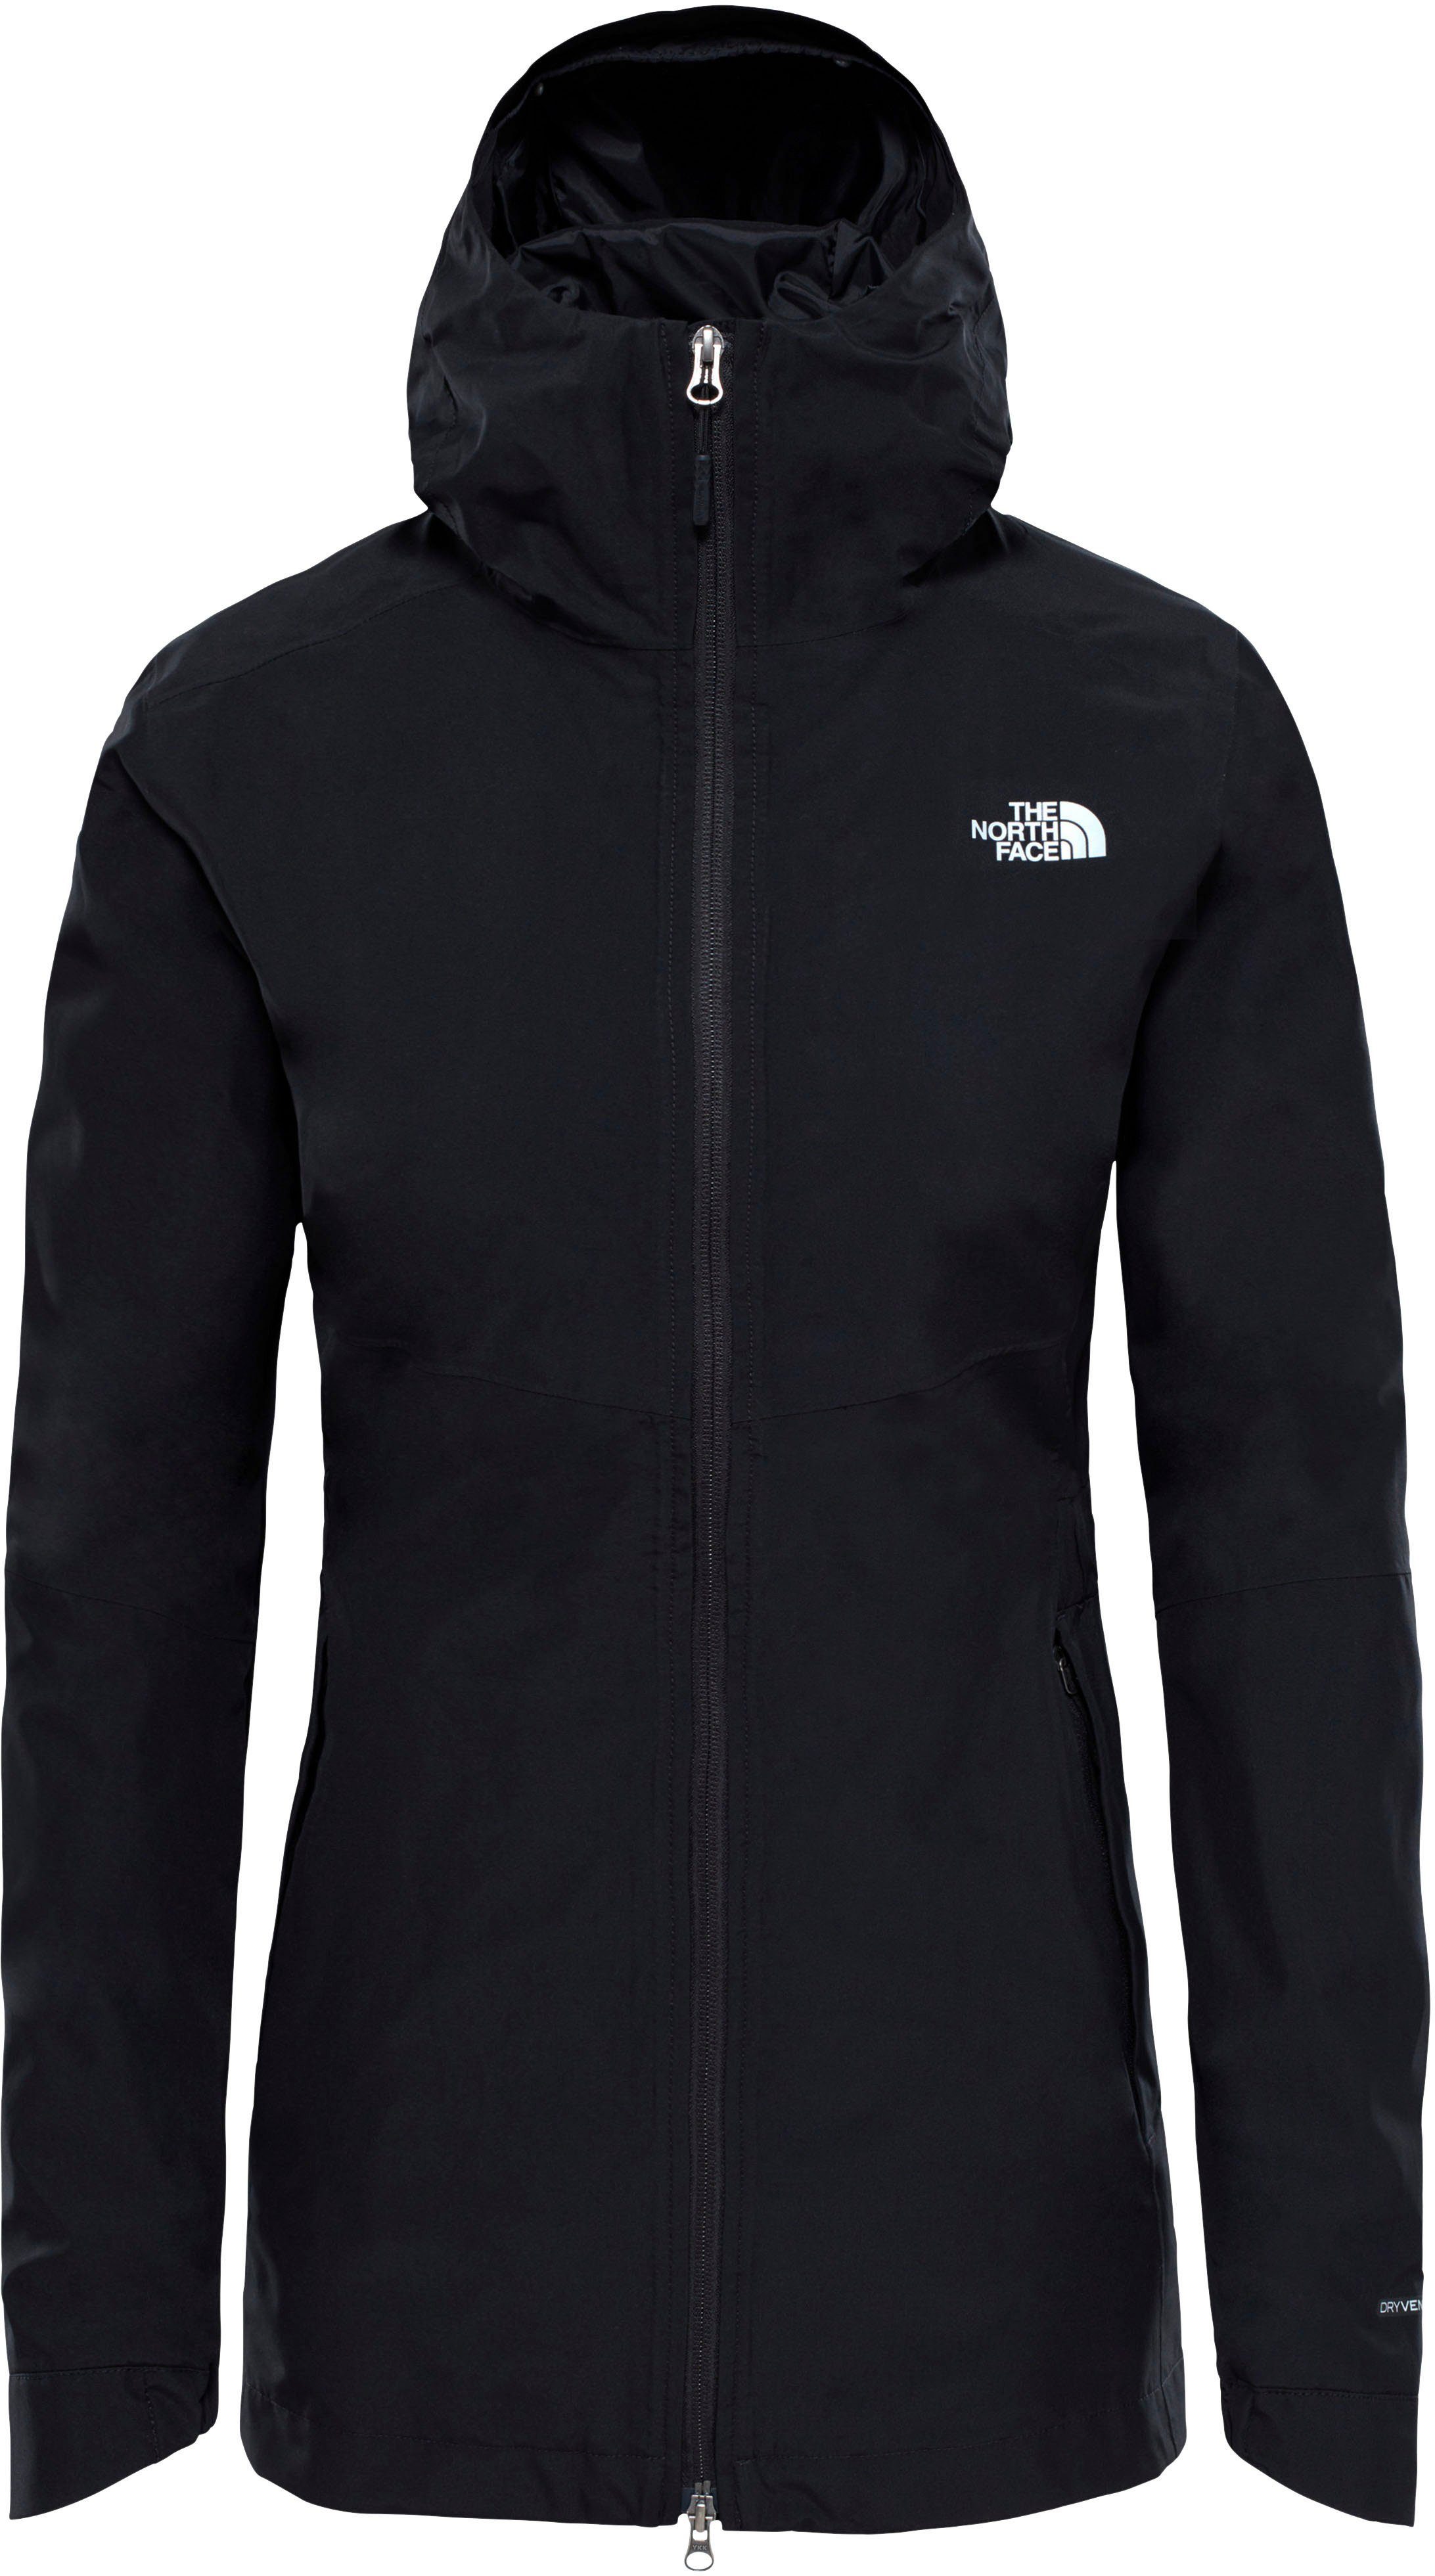 The North Face Funktionsparka »HIKESTE« kaufen | OTTO